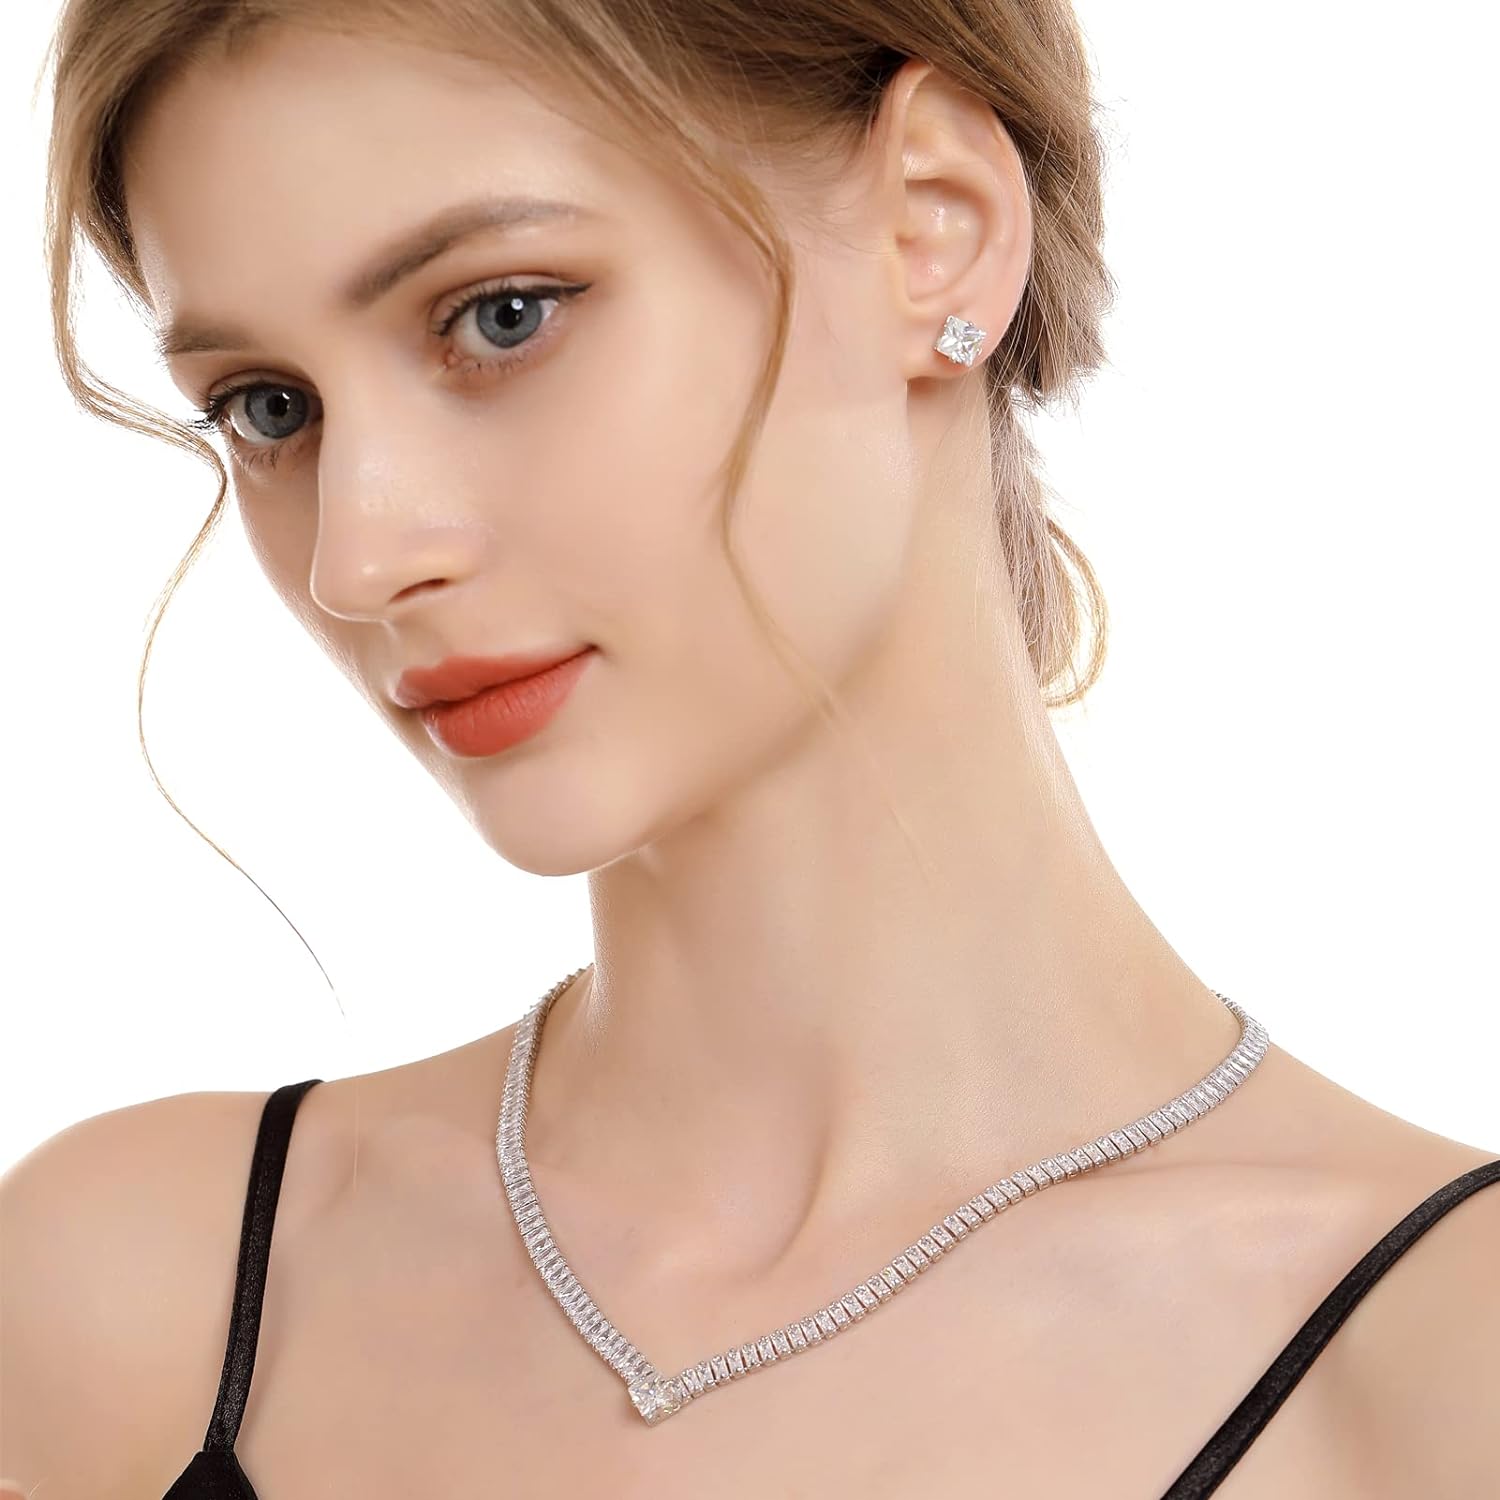 huiphong Women Bridal Jewelry Set, Wedding Necklace Earrings, Hypoallergenic Party Jewelry, Shiny White AAA Cubic Zirconia, Suitable for Women and Bridesmaids.